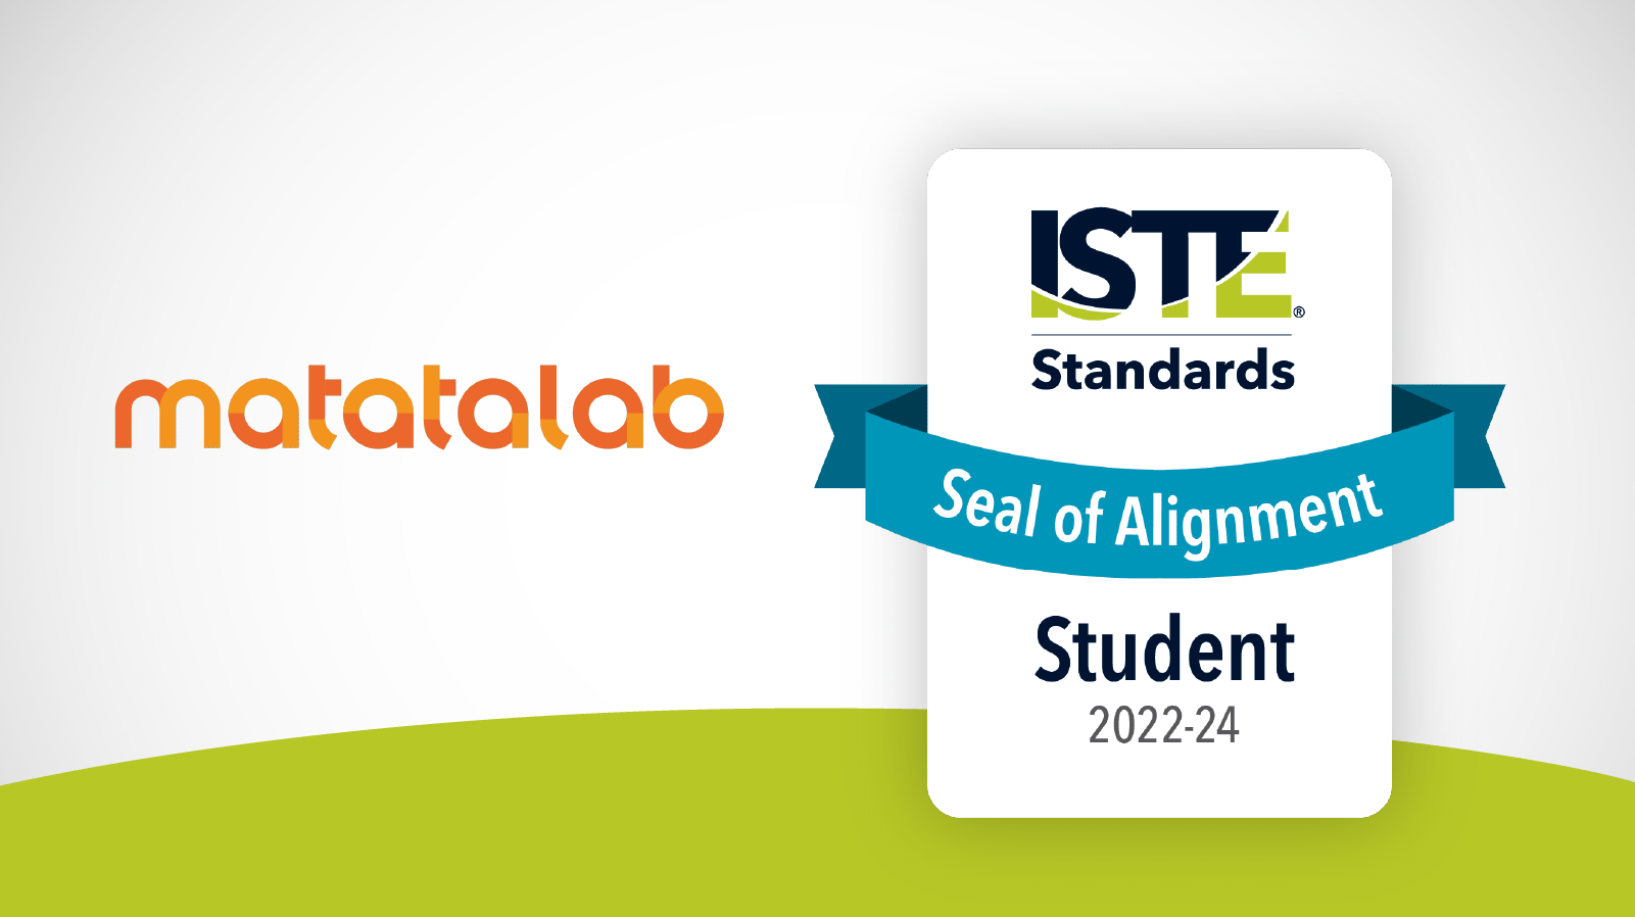 matatalab is awarded with ISTE Seal of Alignment